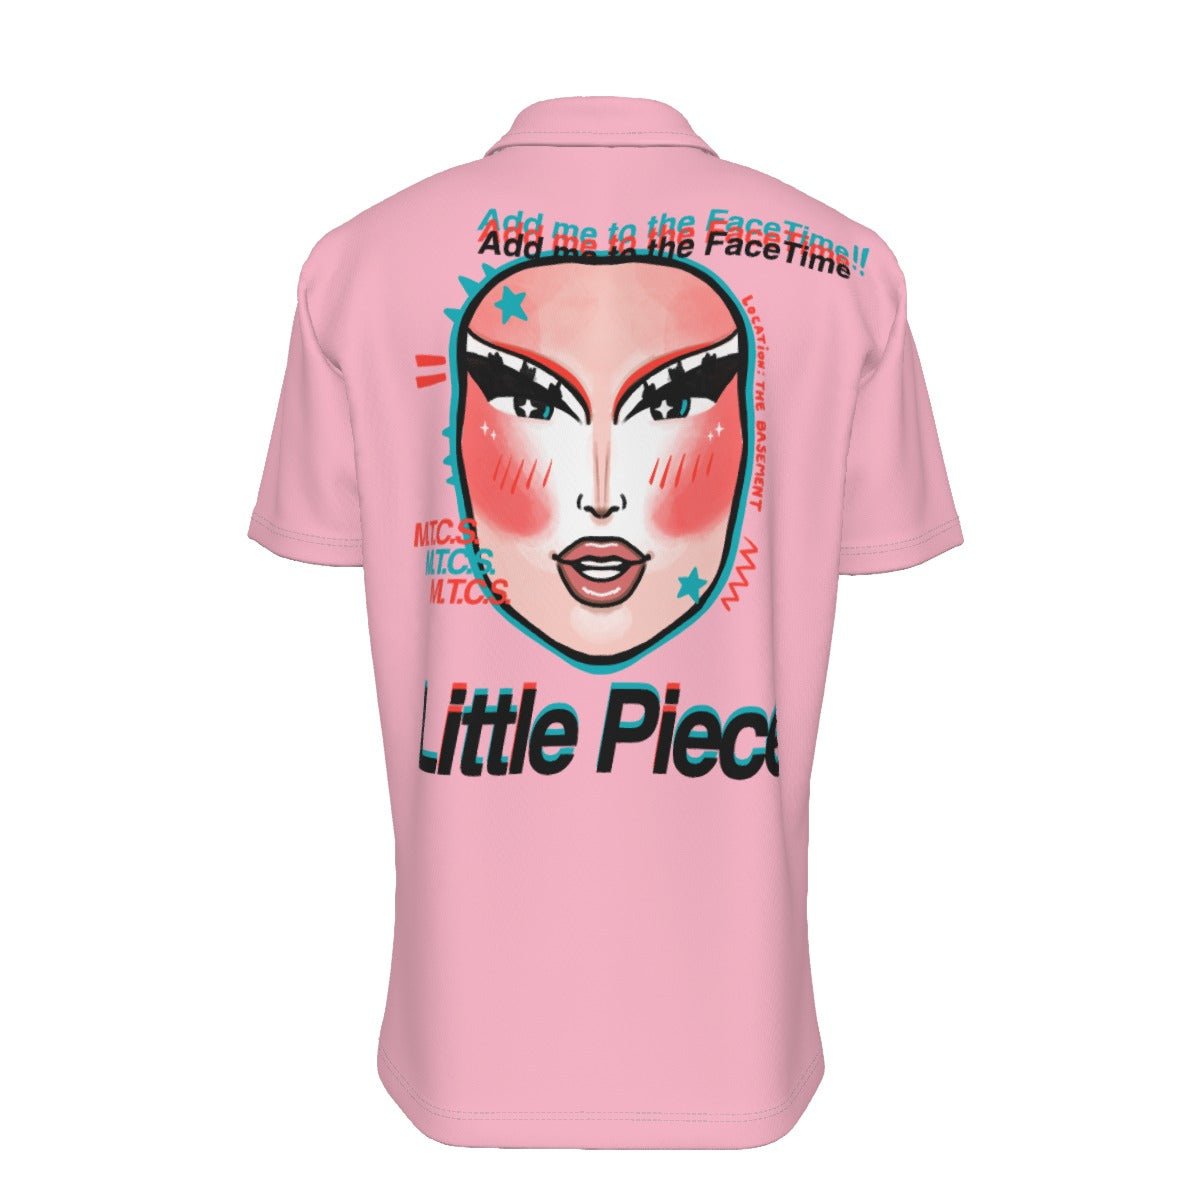 Little Piece - Add Me To The Face Time Button Shirt - dragqueenmerch